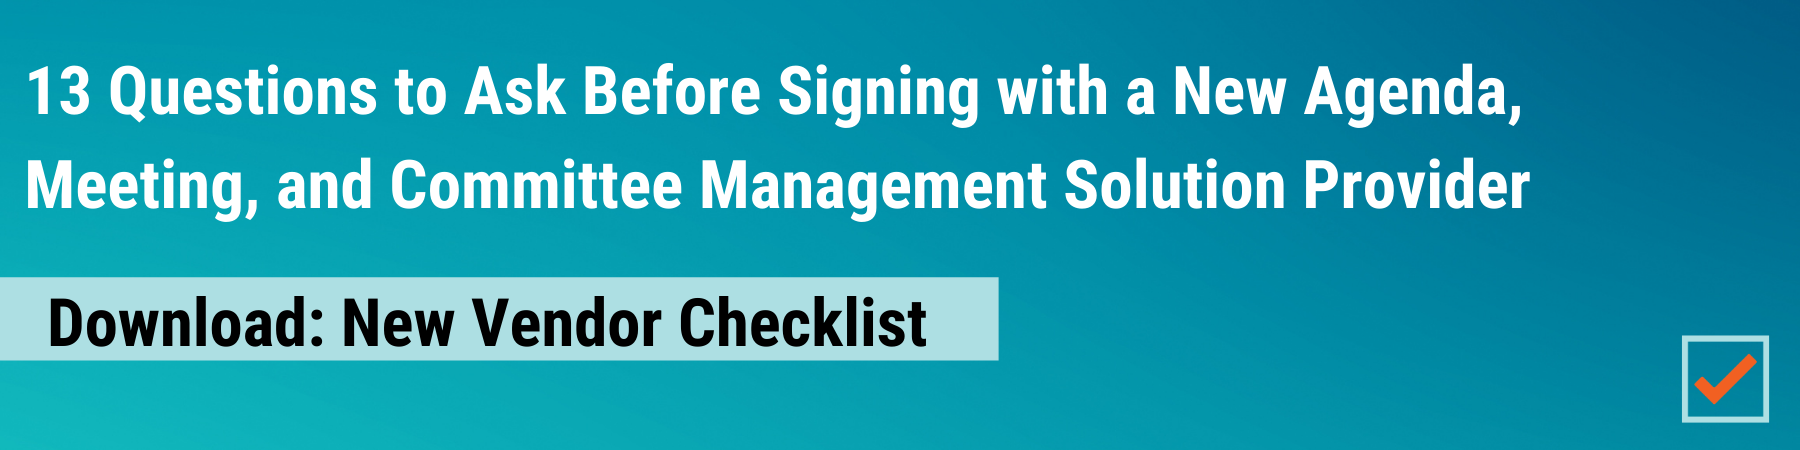 Download New Vendor Checklist: 13 Questions to Ask Before Signing With a New Agenda, Meeting, and Committee Management Solution Provider.